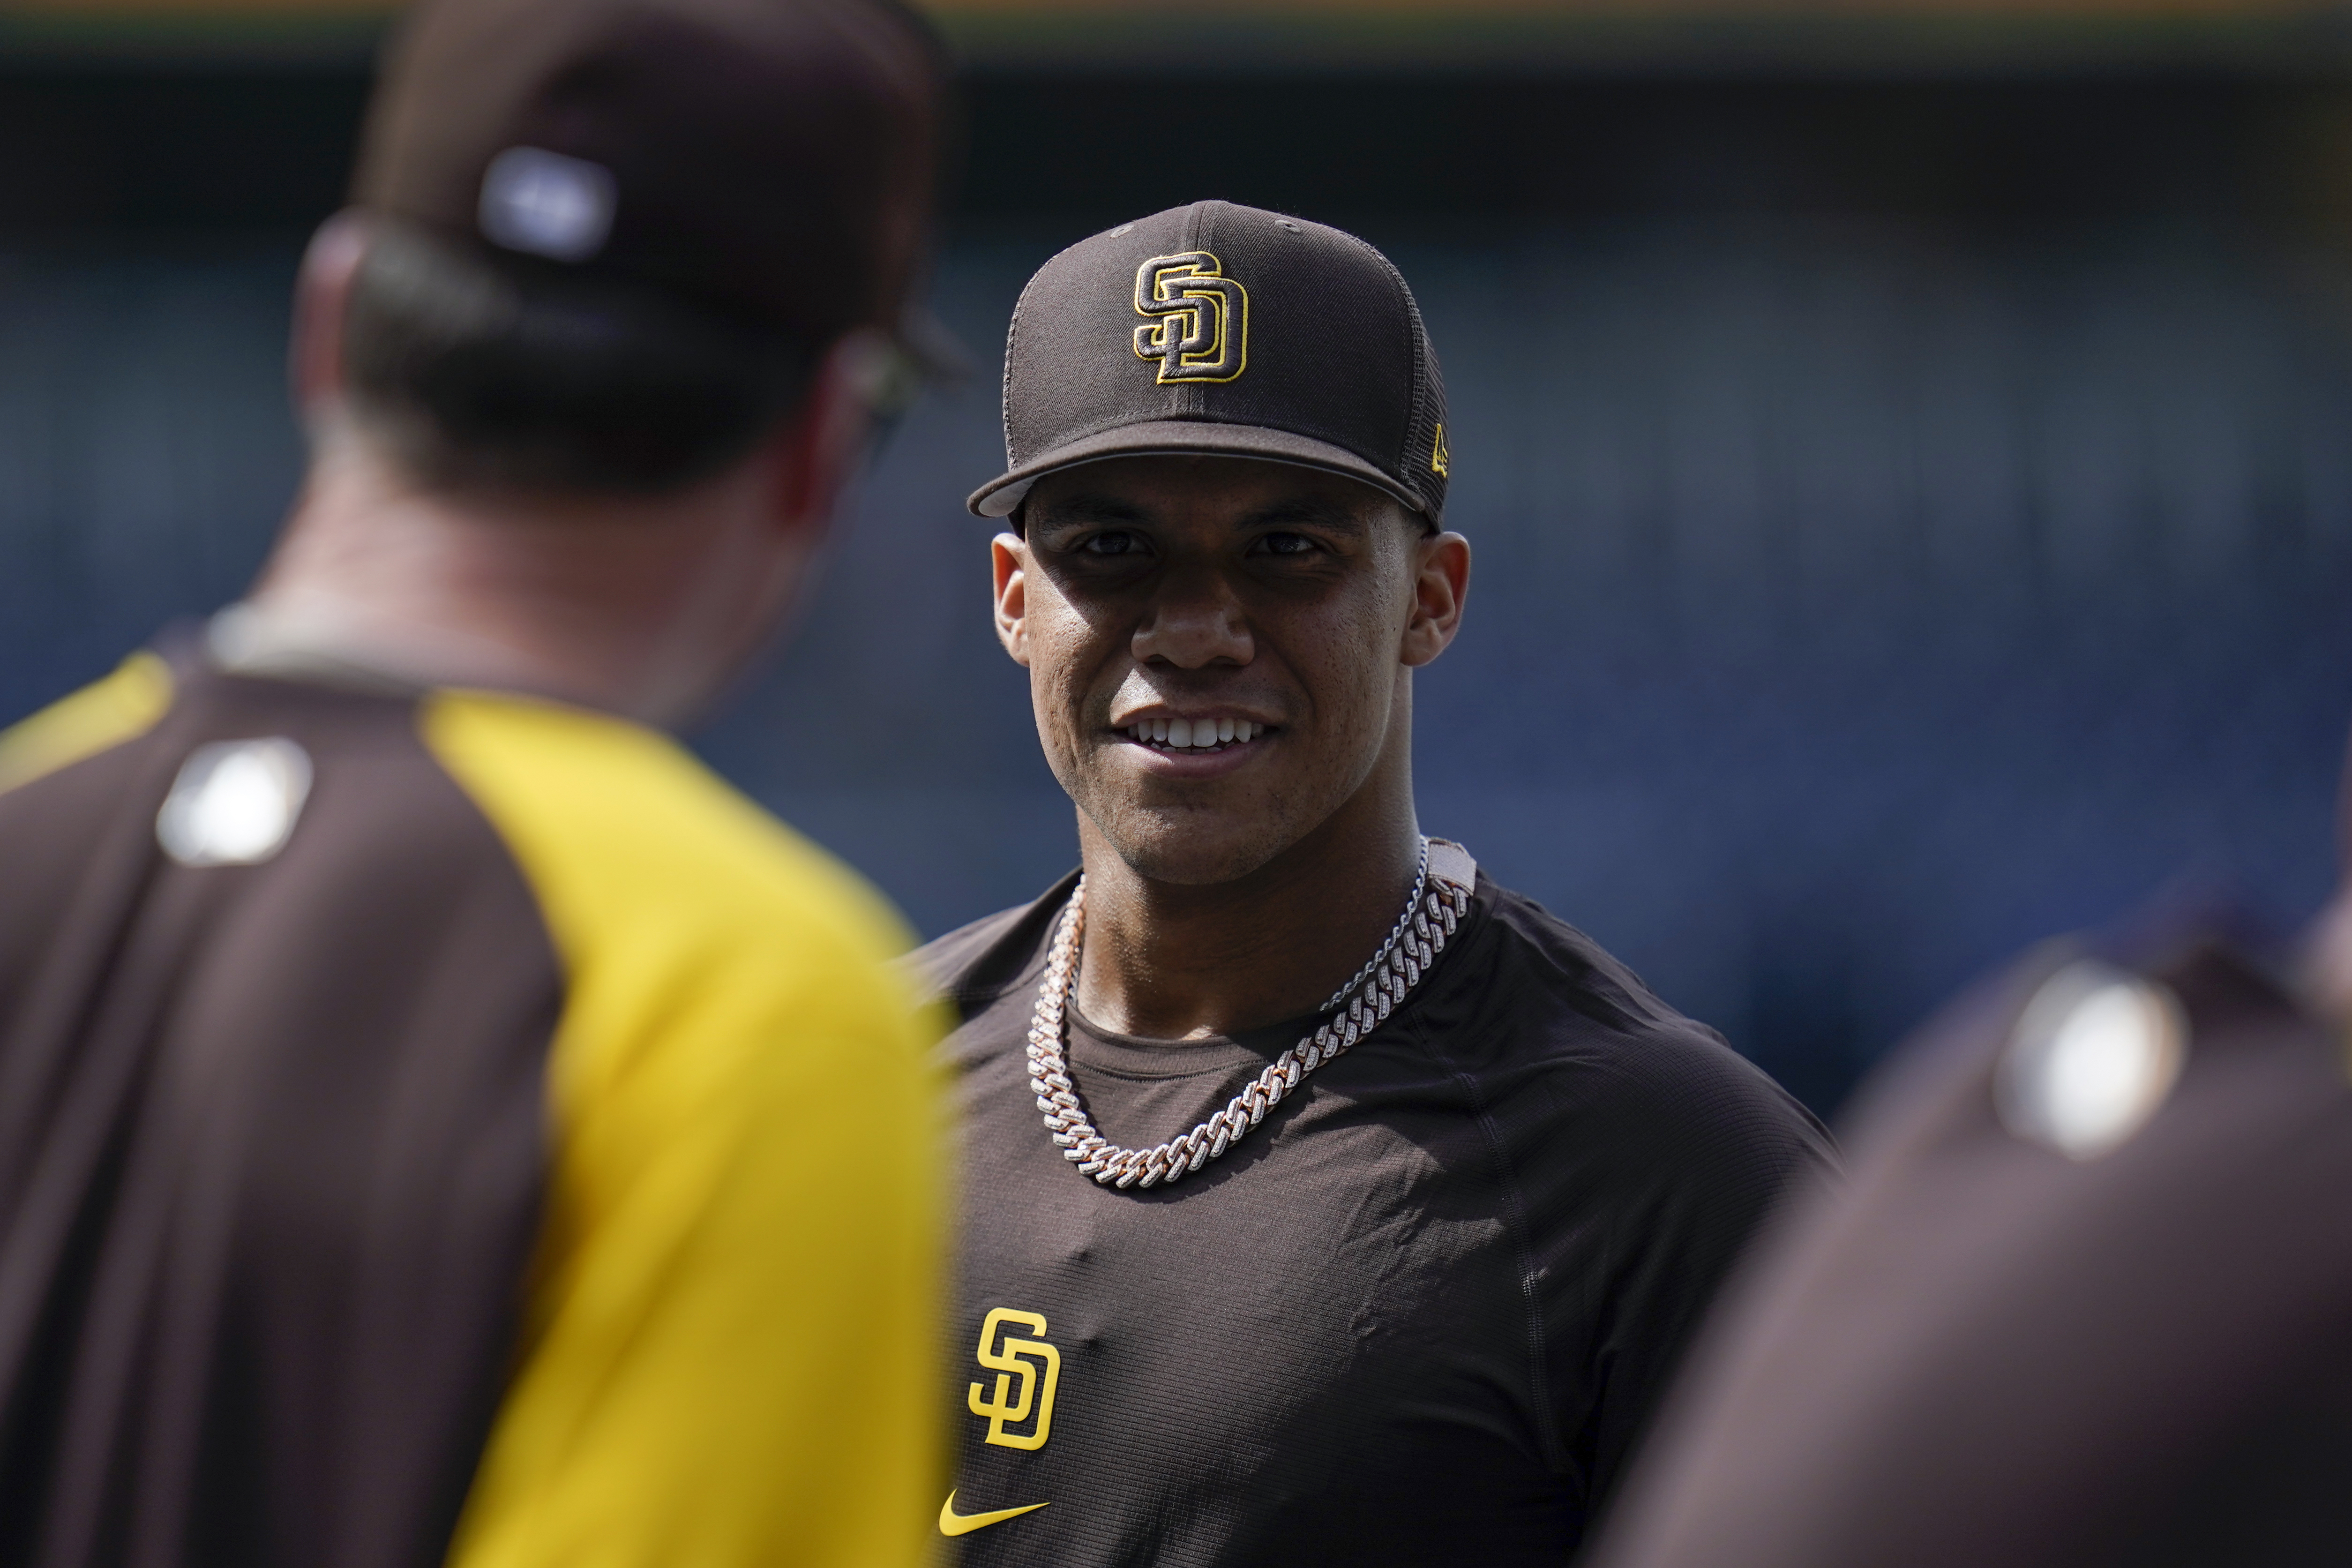 Fernando Tatis Jr. bobblehead out, Juan Soto T-shirt in: San Diego Padres  switch giveaway after positive test and suspension – Daily Press